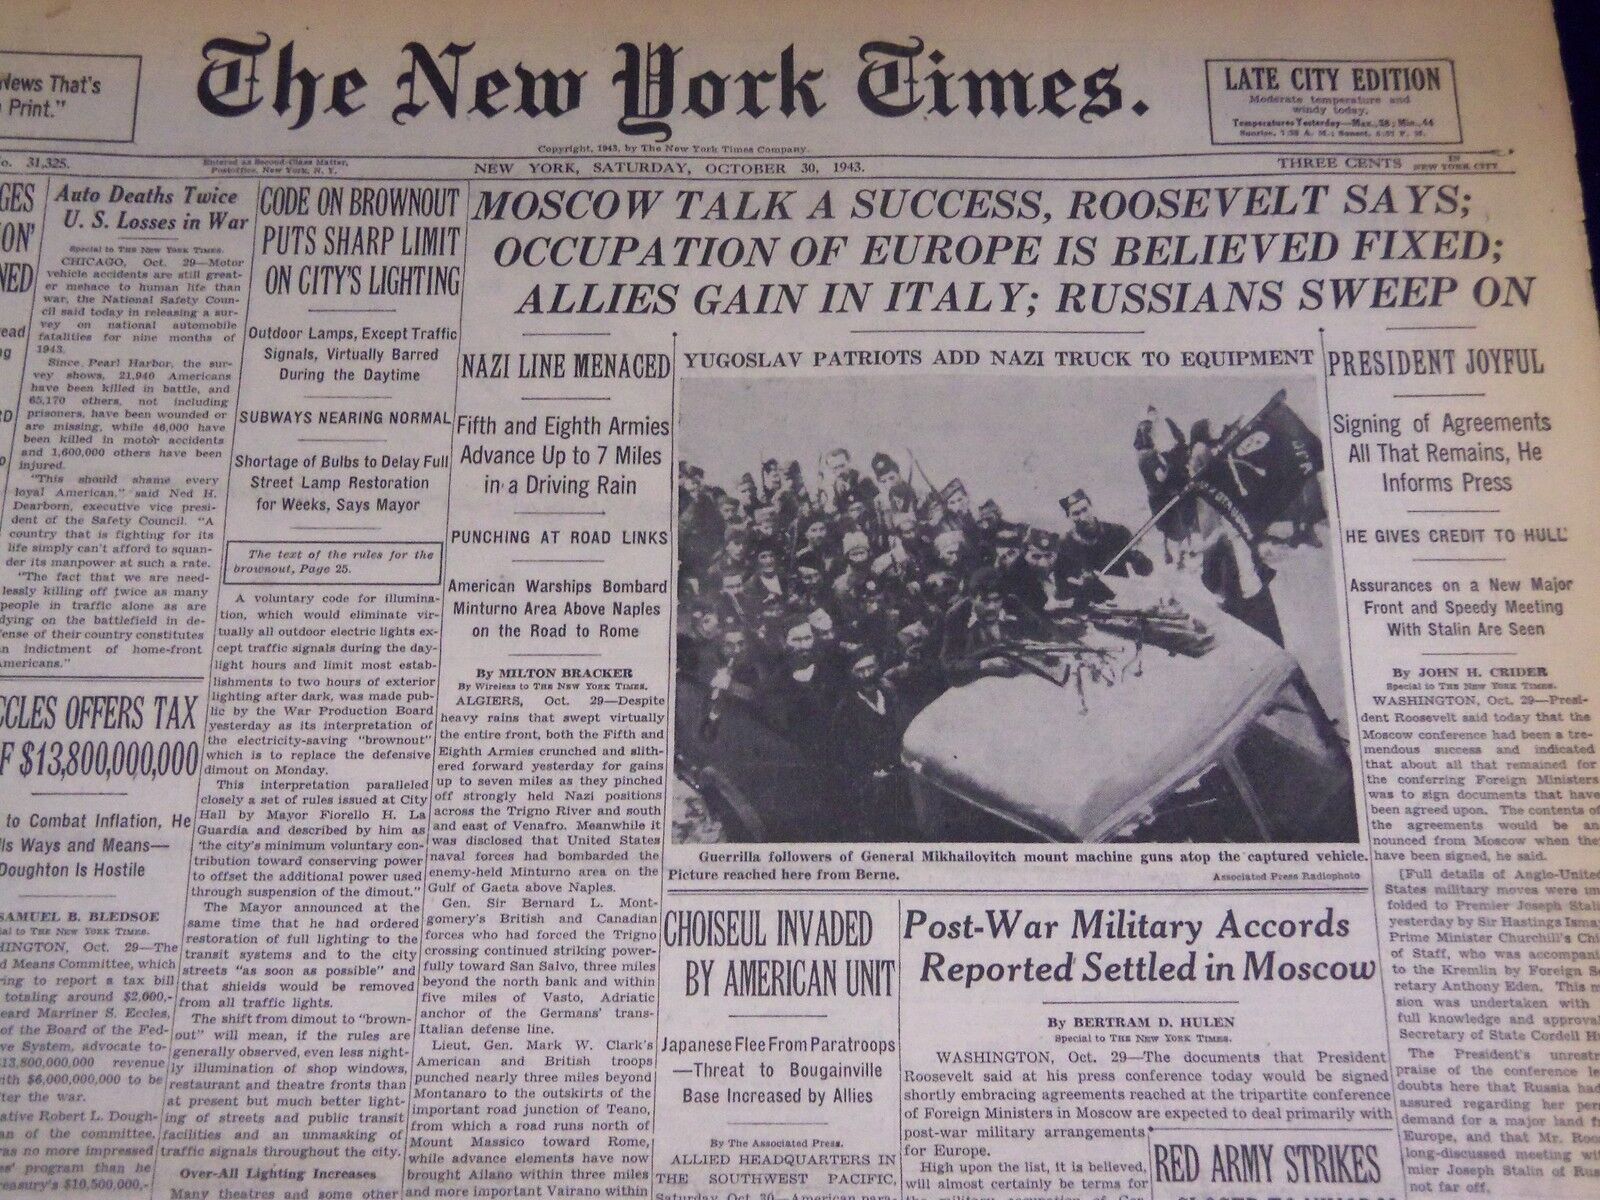 1943 OCT 30 NEW YORK TIMES - MOSCOW TALK A SUCCESS, ROOSEVELT, SAYS - NT 1896